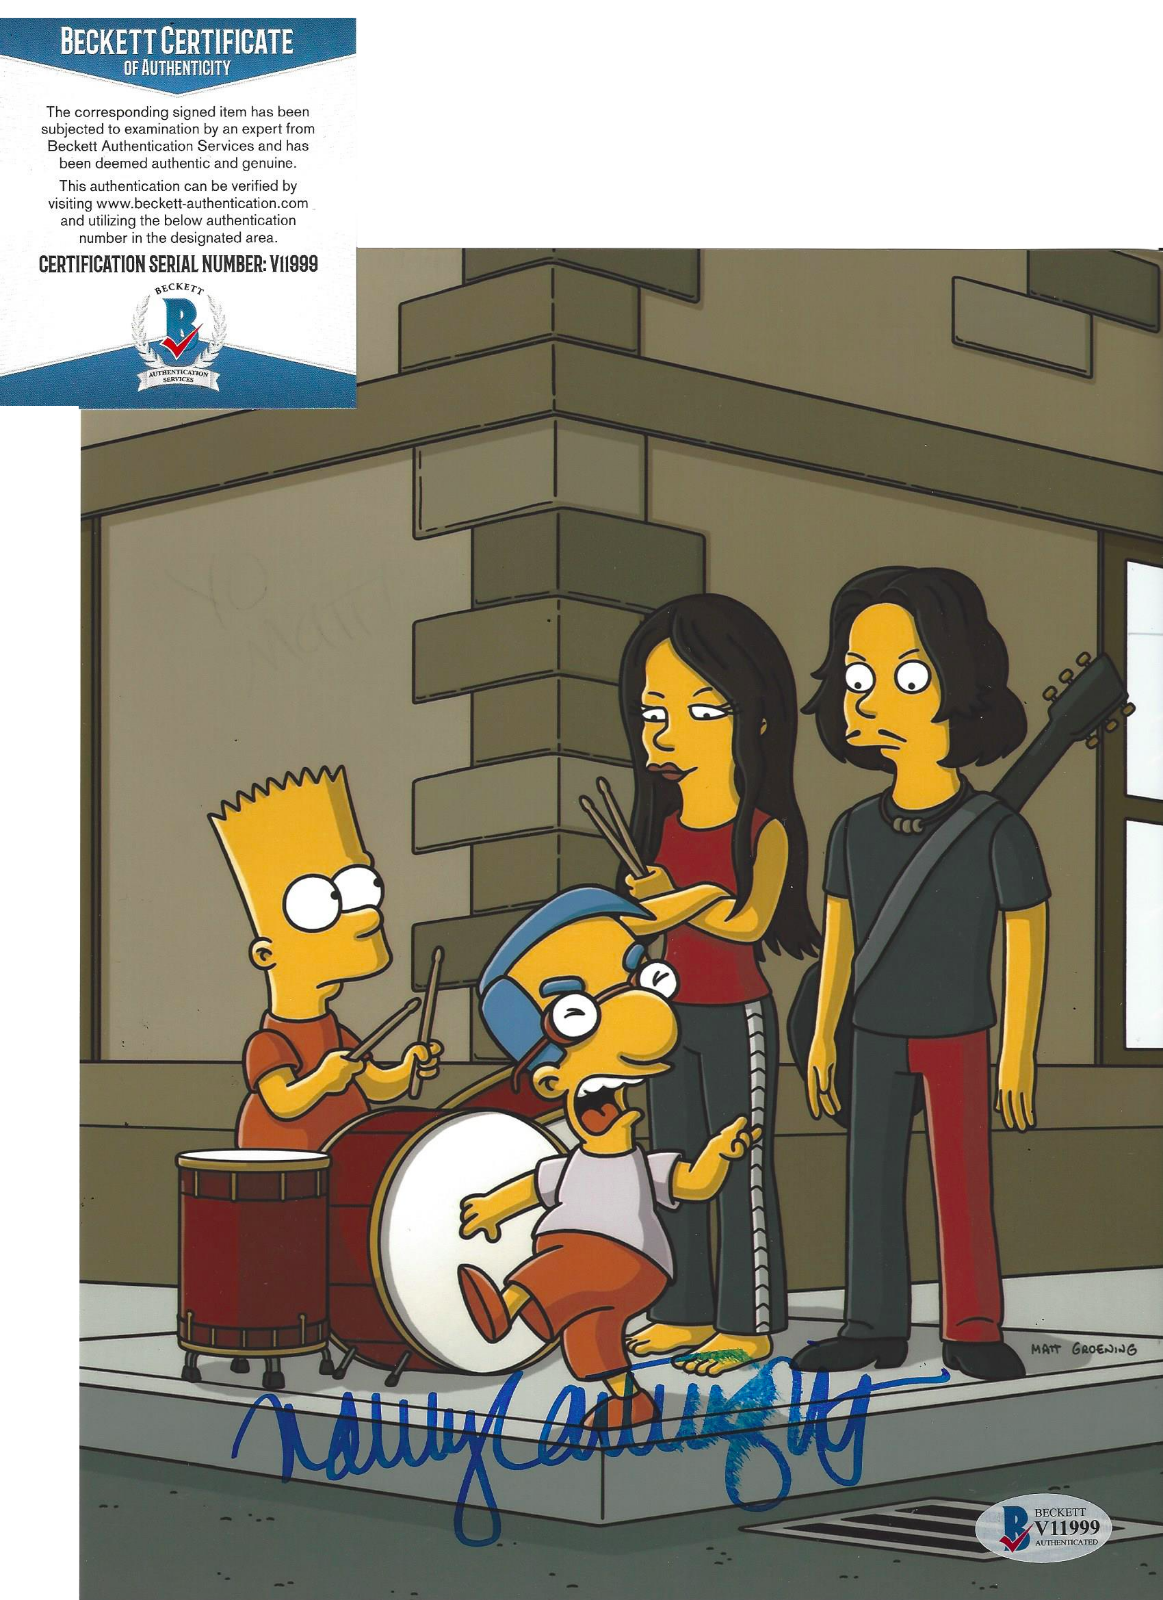 NANCY CARTWRIGHT SIGNED 'THE SIMPSONS' BART SIMPSON 8x10 Photo Poster painting B BECKETT COA BAS